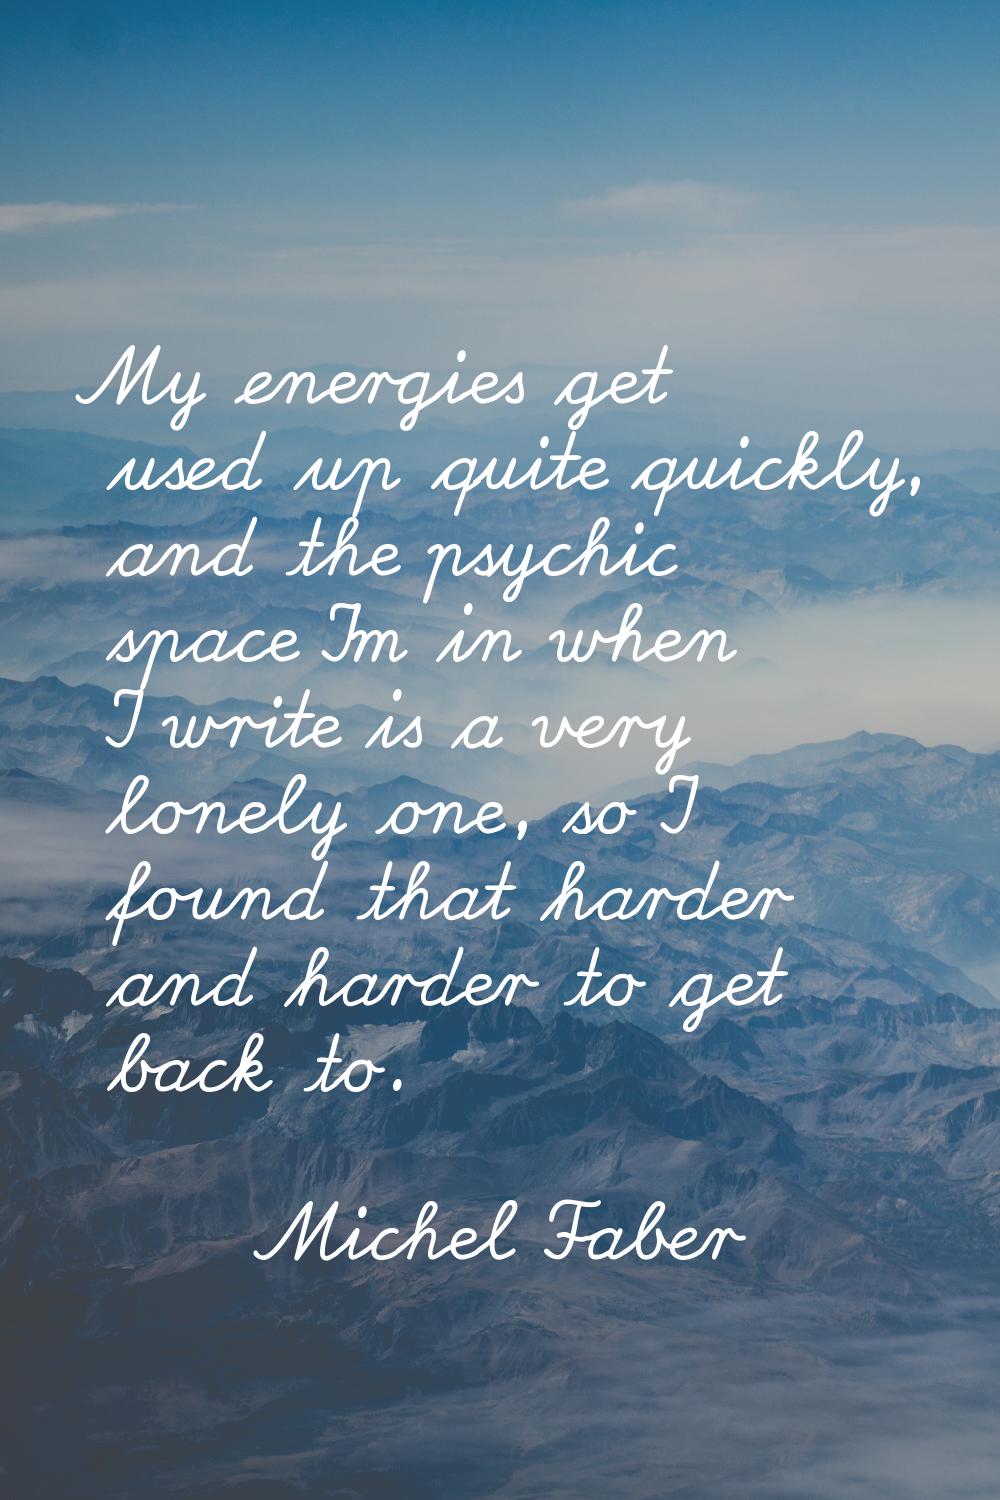 My energies get used up quite quickly, and the psychic space I'm in when I write is a very lonely o